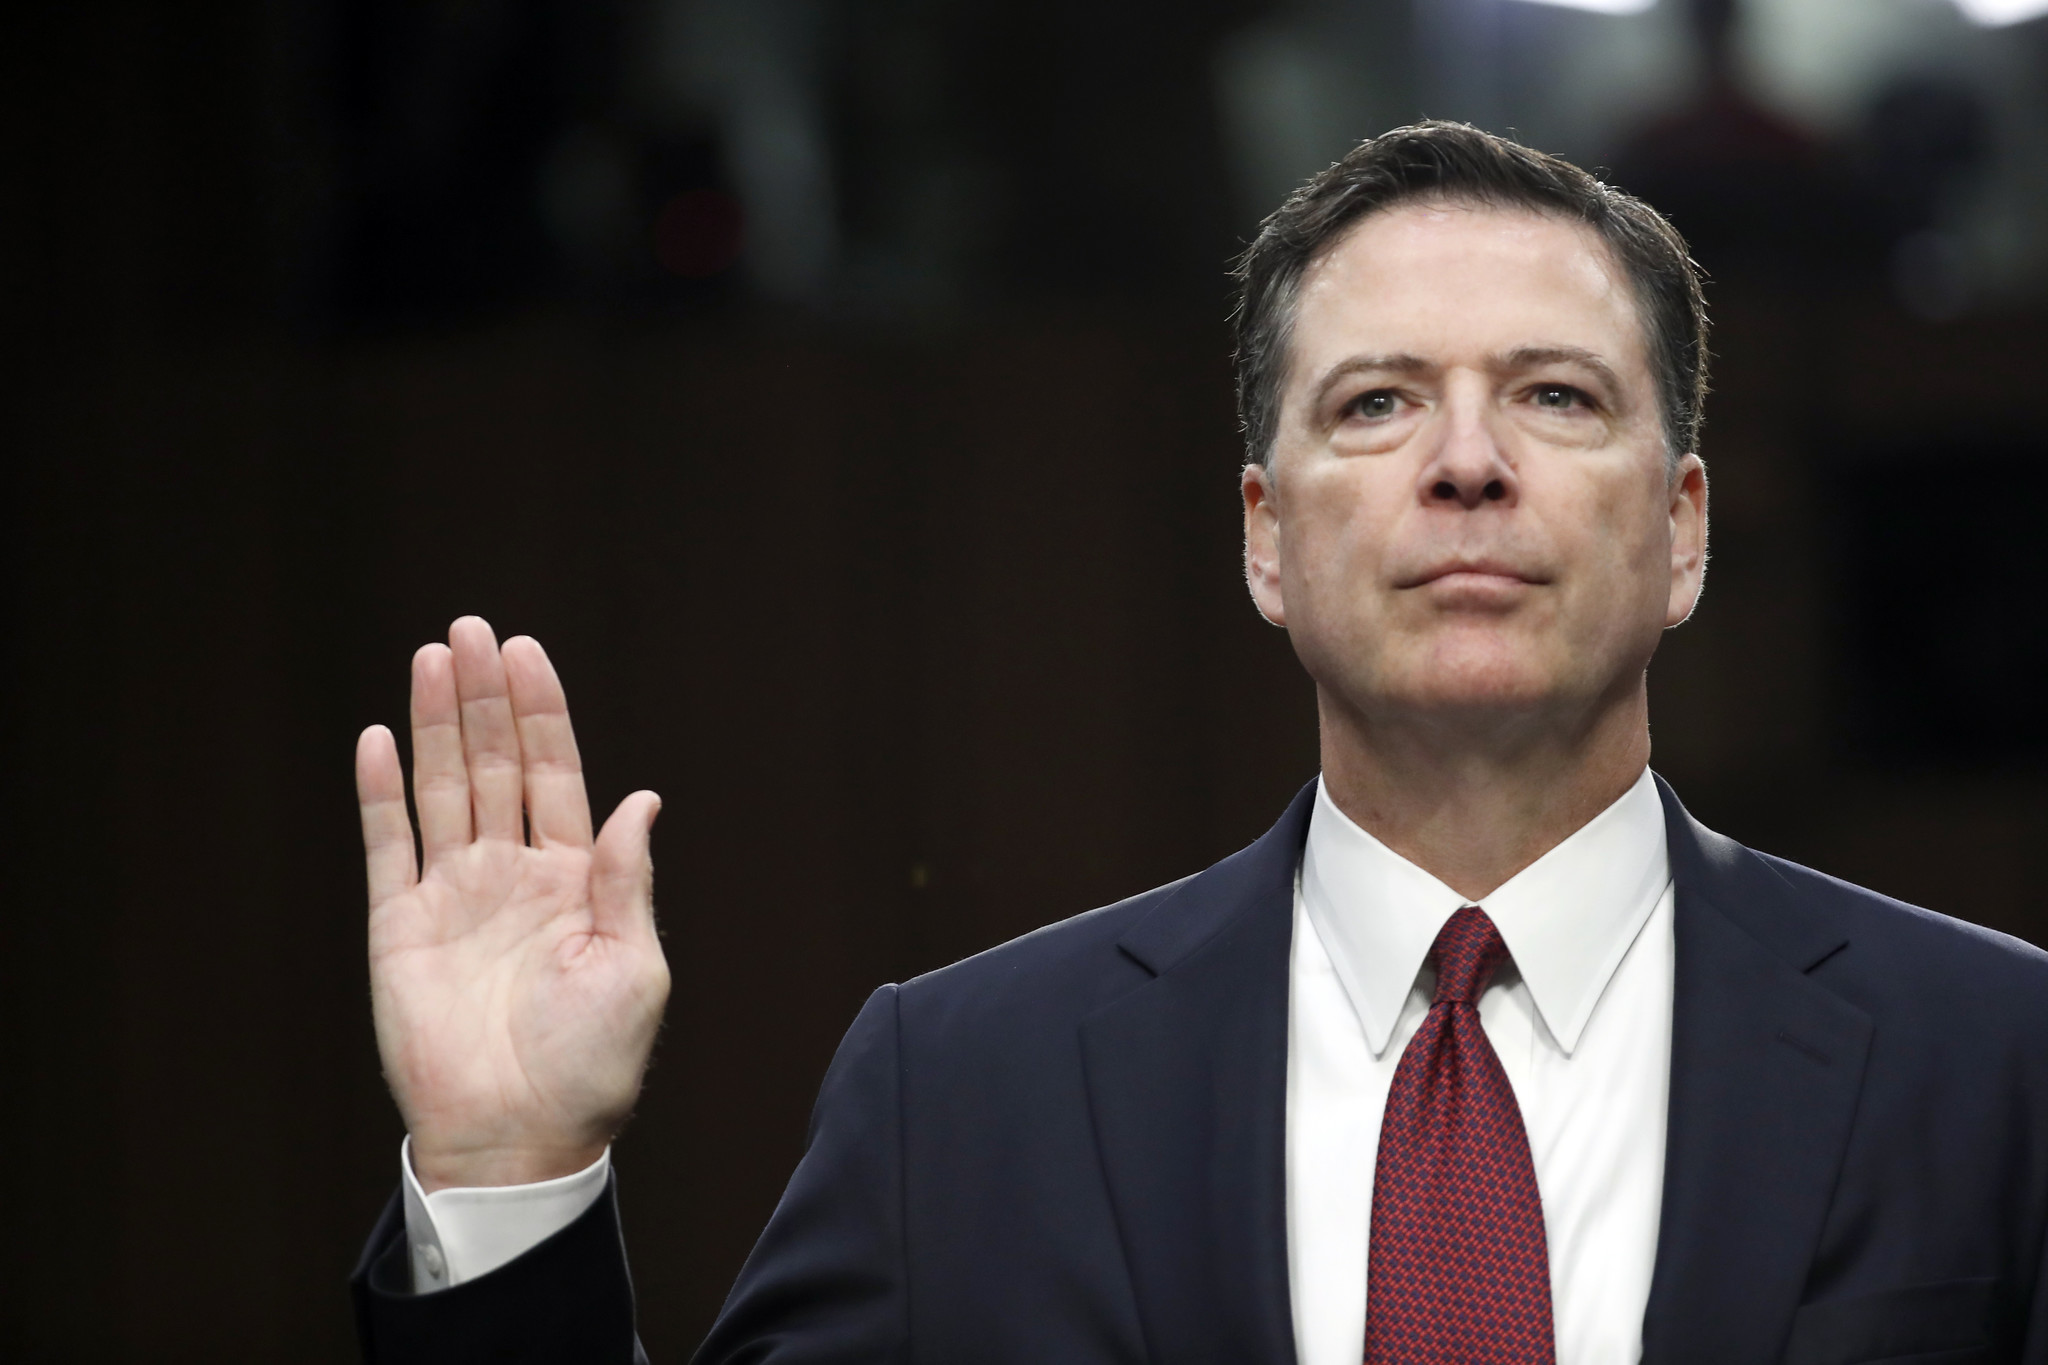 Former FBI Director James Comey is sworn in during a hearing before the Senate Select Committee on Intelligence in June.